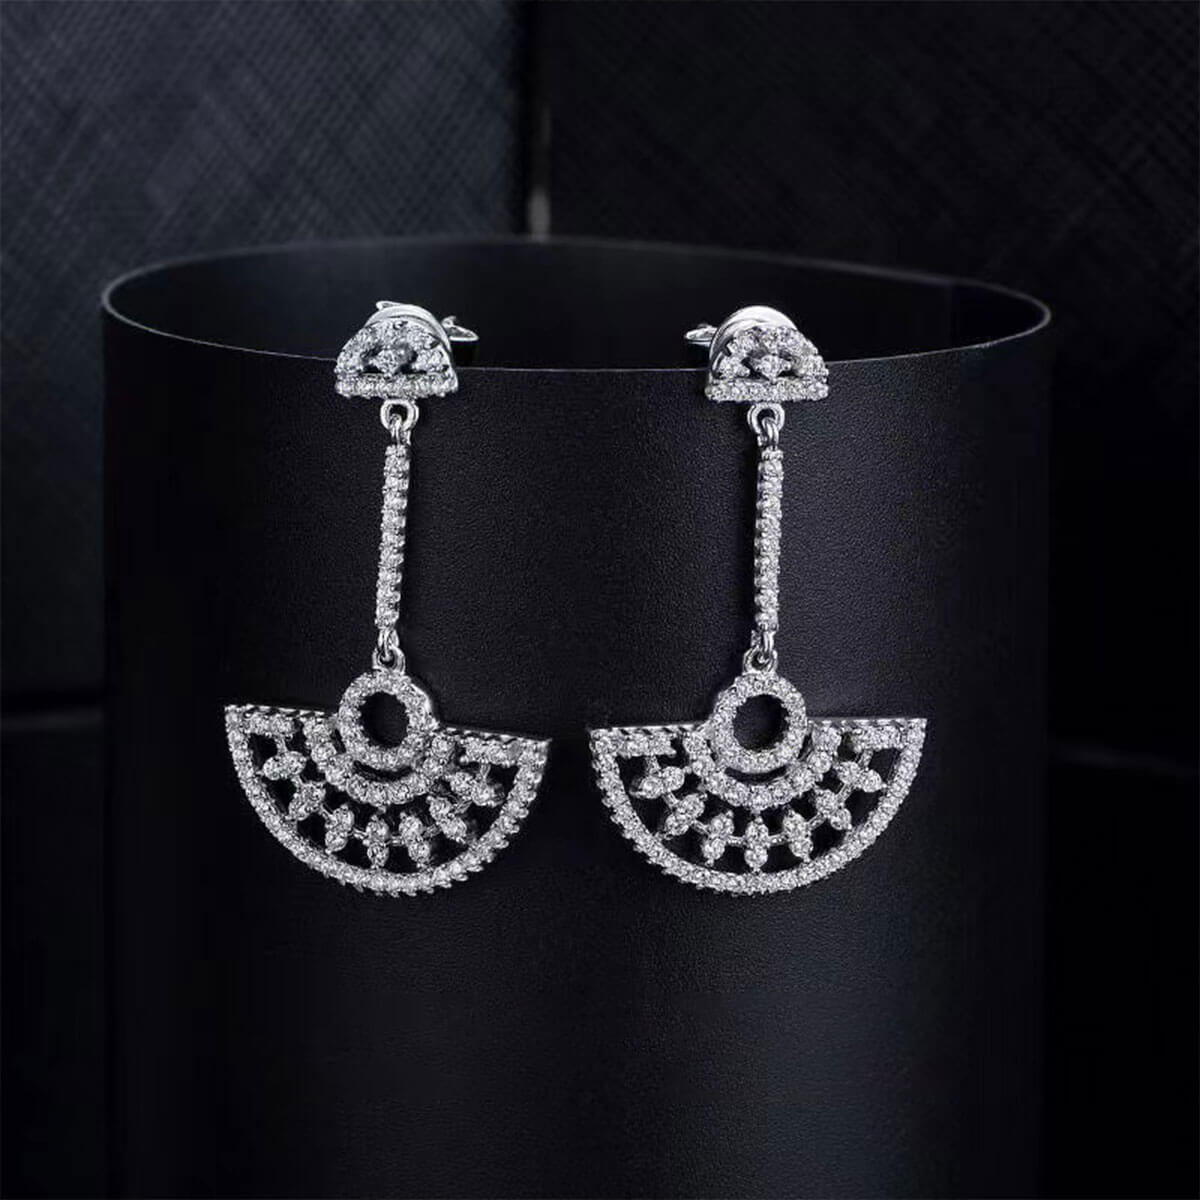 White Gold Hollow Full Stones Sector Drop Earrings